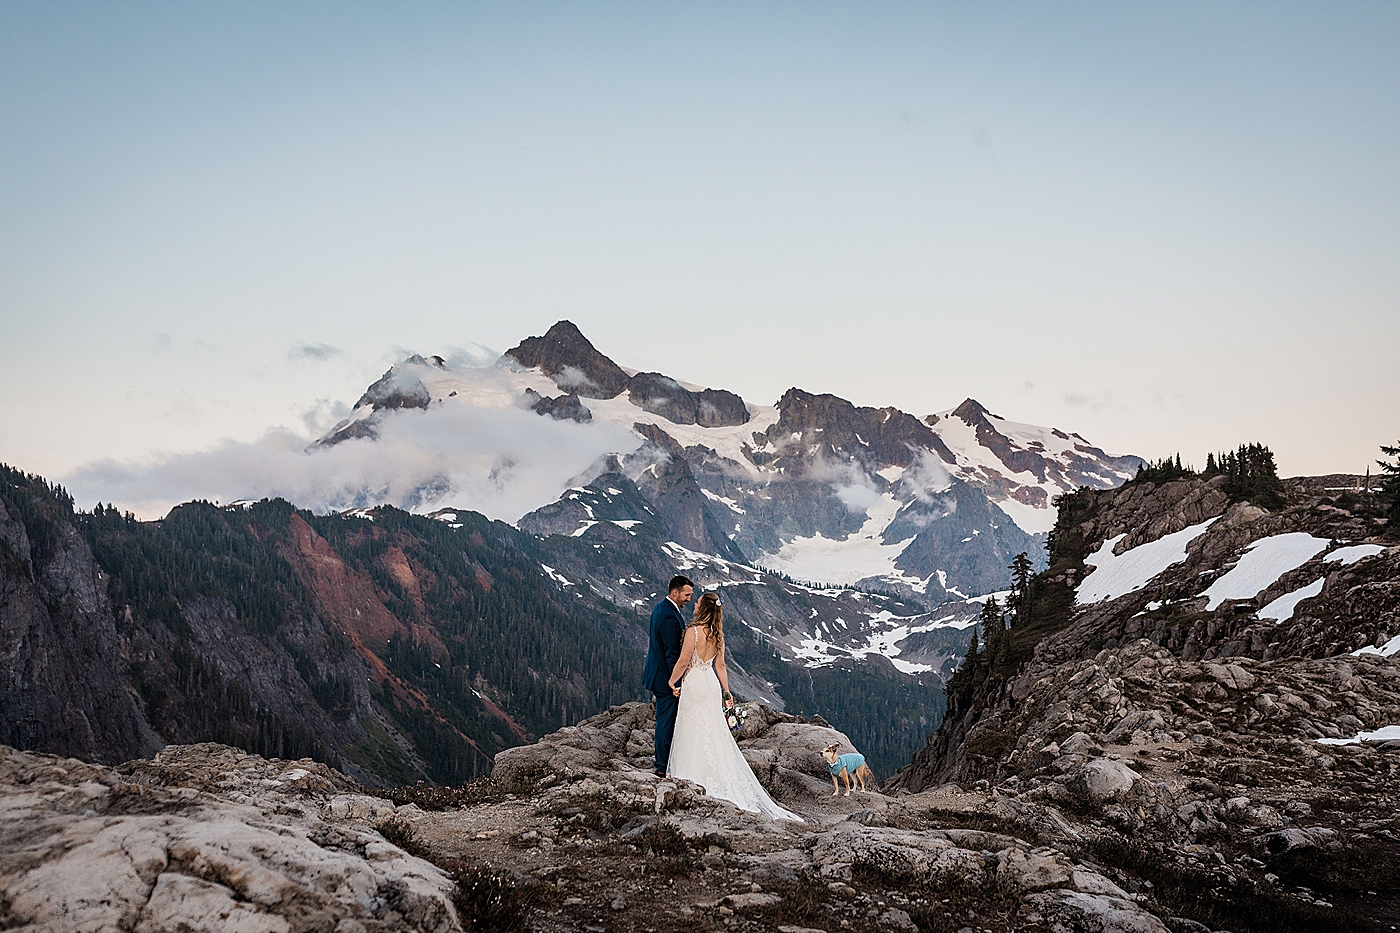 Couples portraits with stunning mountain views behind them. Photo by Megan Montalvo Photography.